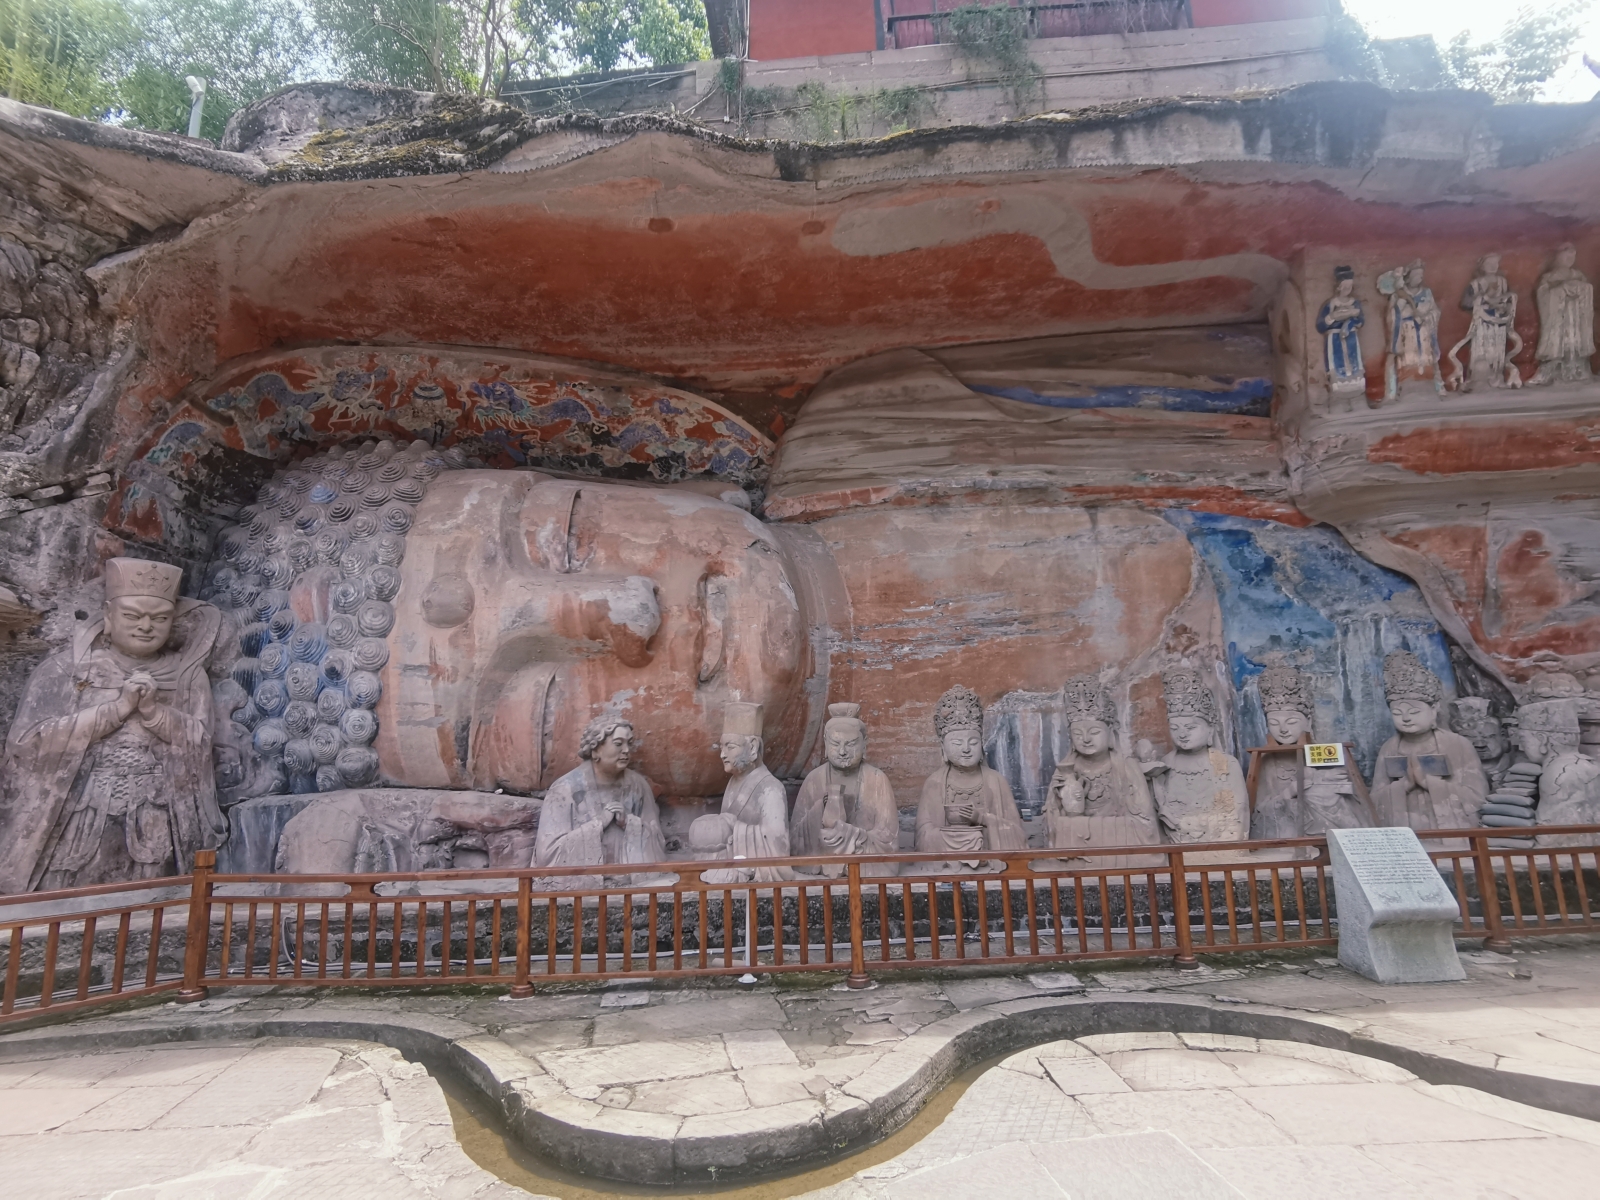 Buddhist sculptures at the Dazu Rock Carvings scenic spot in southwest China's Chongqing are seen in this photo taken on August 22, 2023. /CGTN